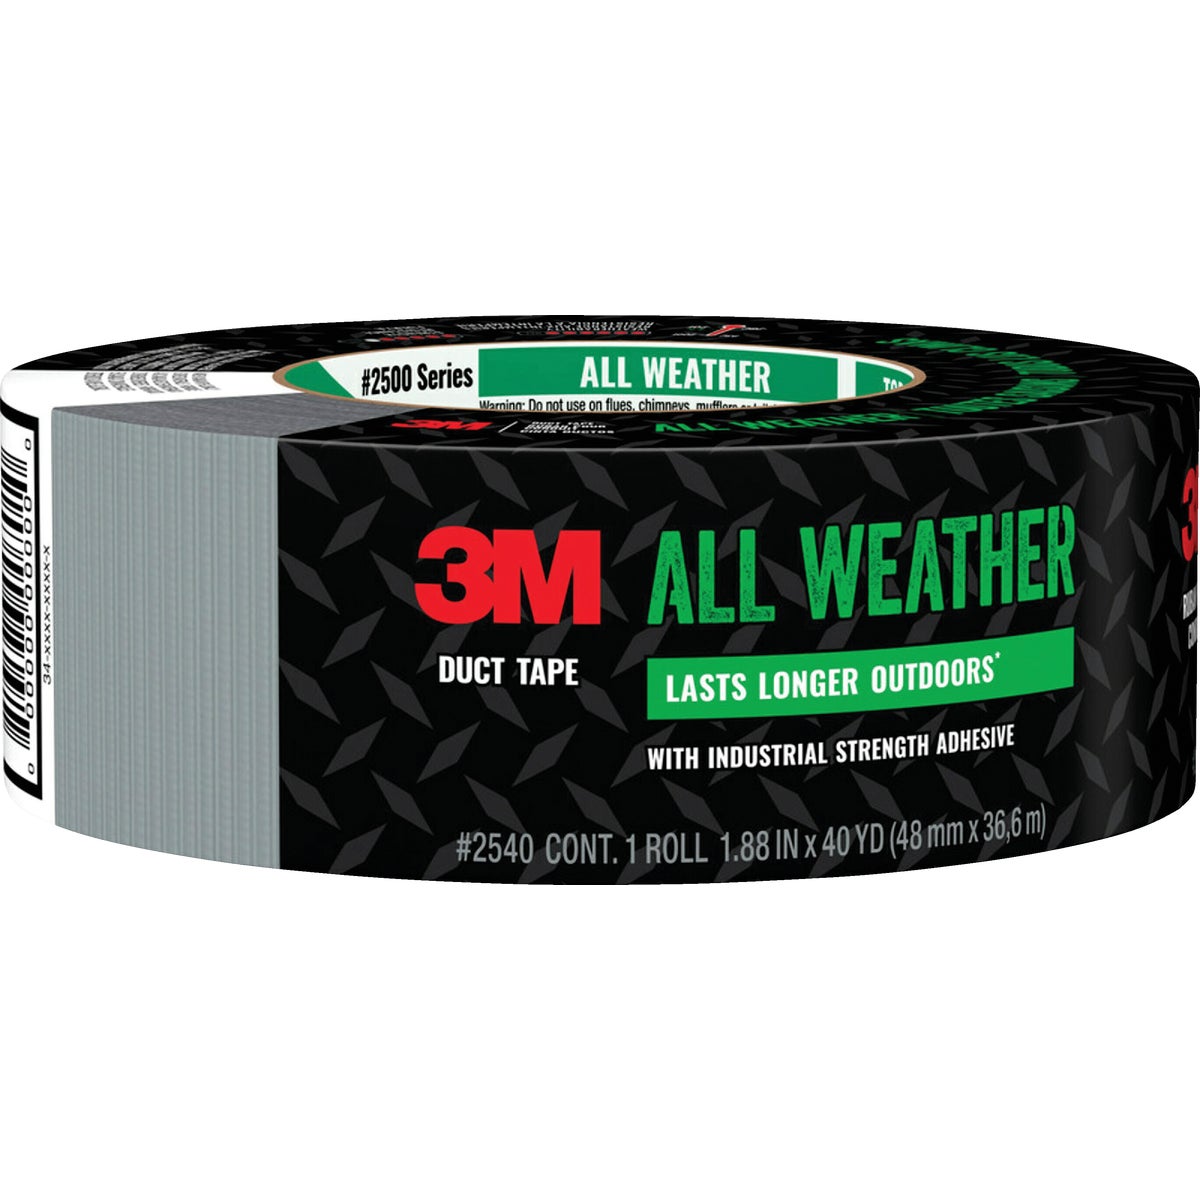 Item 412813, 3M All Weather Duct Tape fears no elements and is specifically designed to 